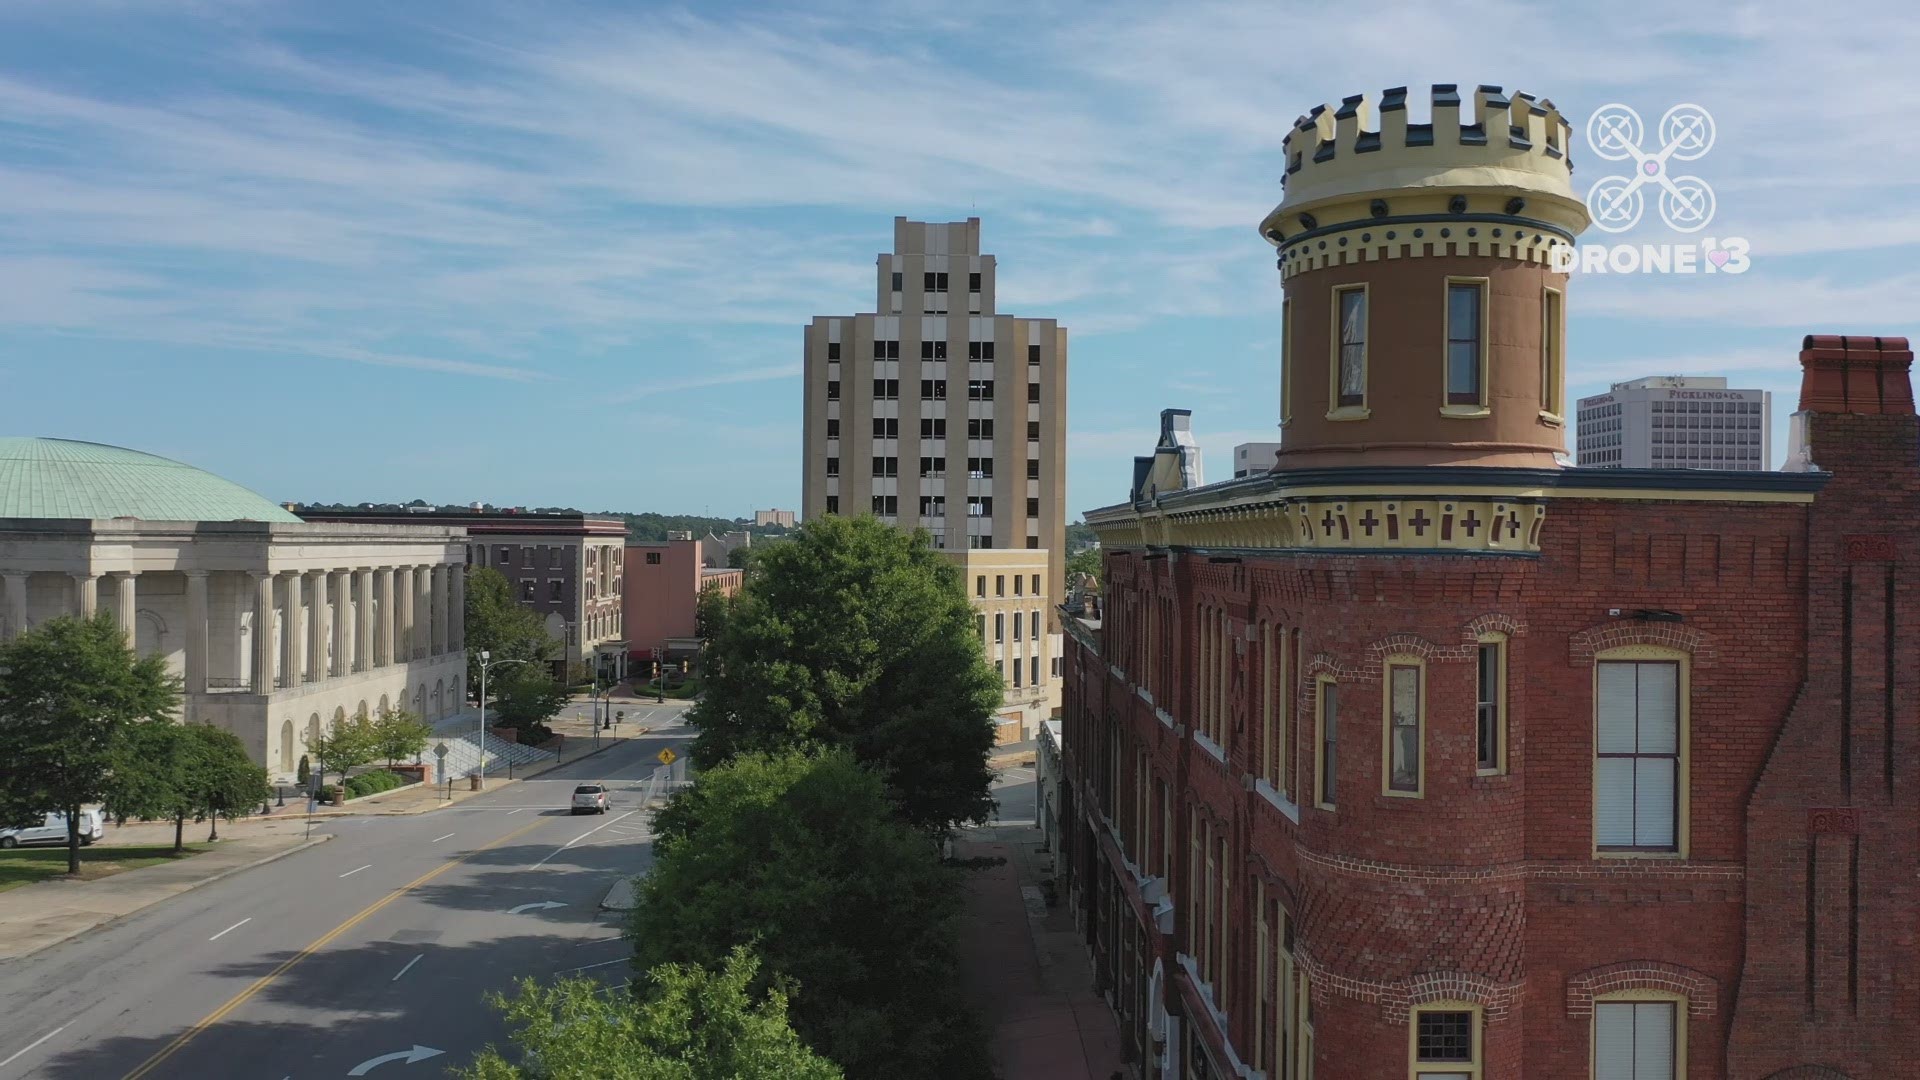 From its vantage over Rosa Parks Square, Drone 13 can take in a number of historic buildings and well-known spots in downtown Macon.